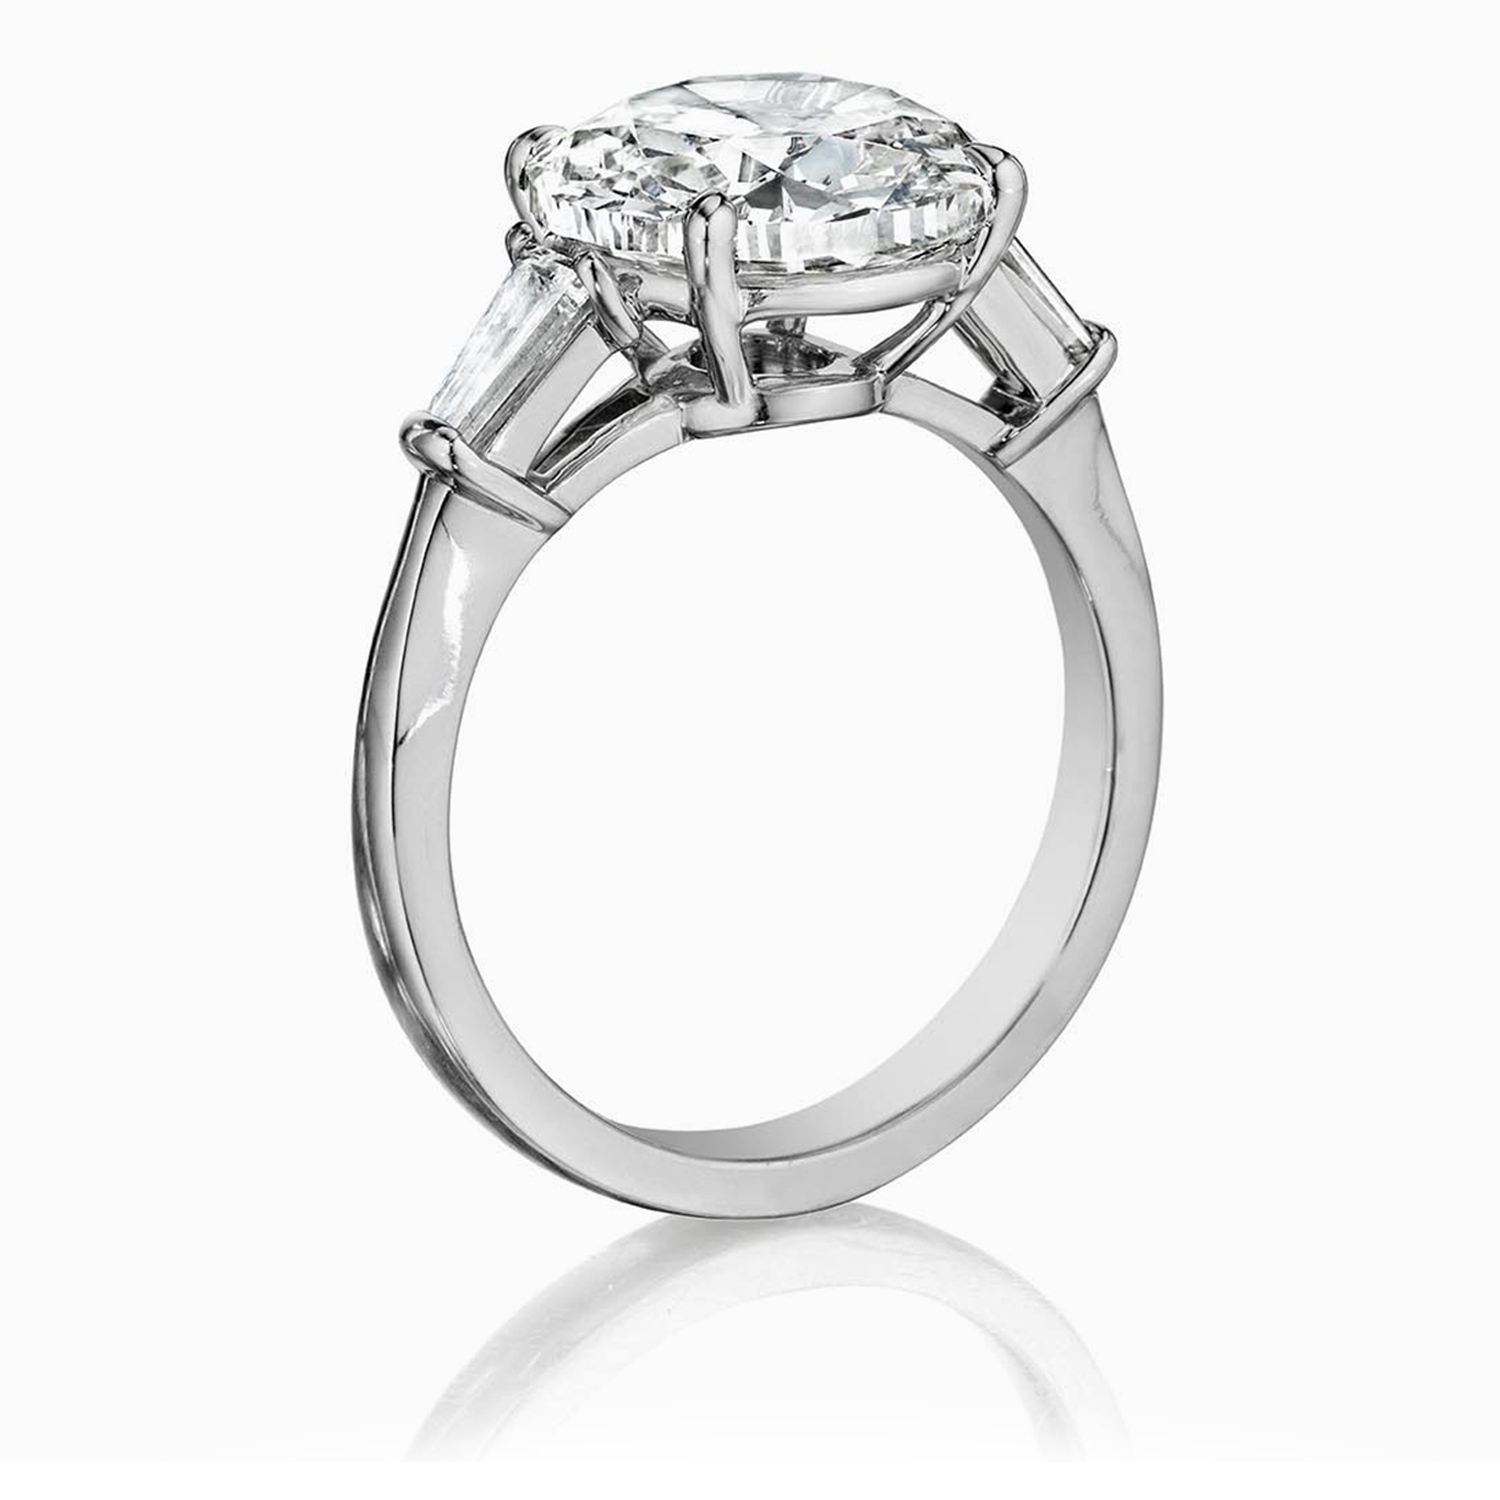 Henri Daussi GCT Classic Cushion with Tapered Baguette Diamonds Engagement Ring